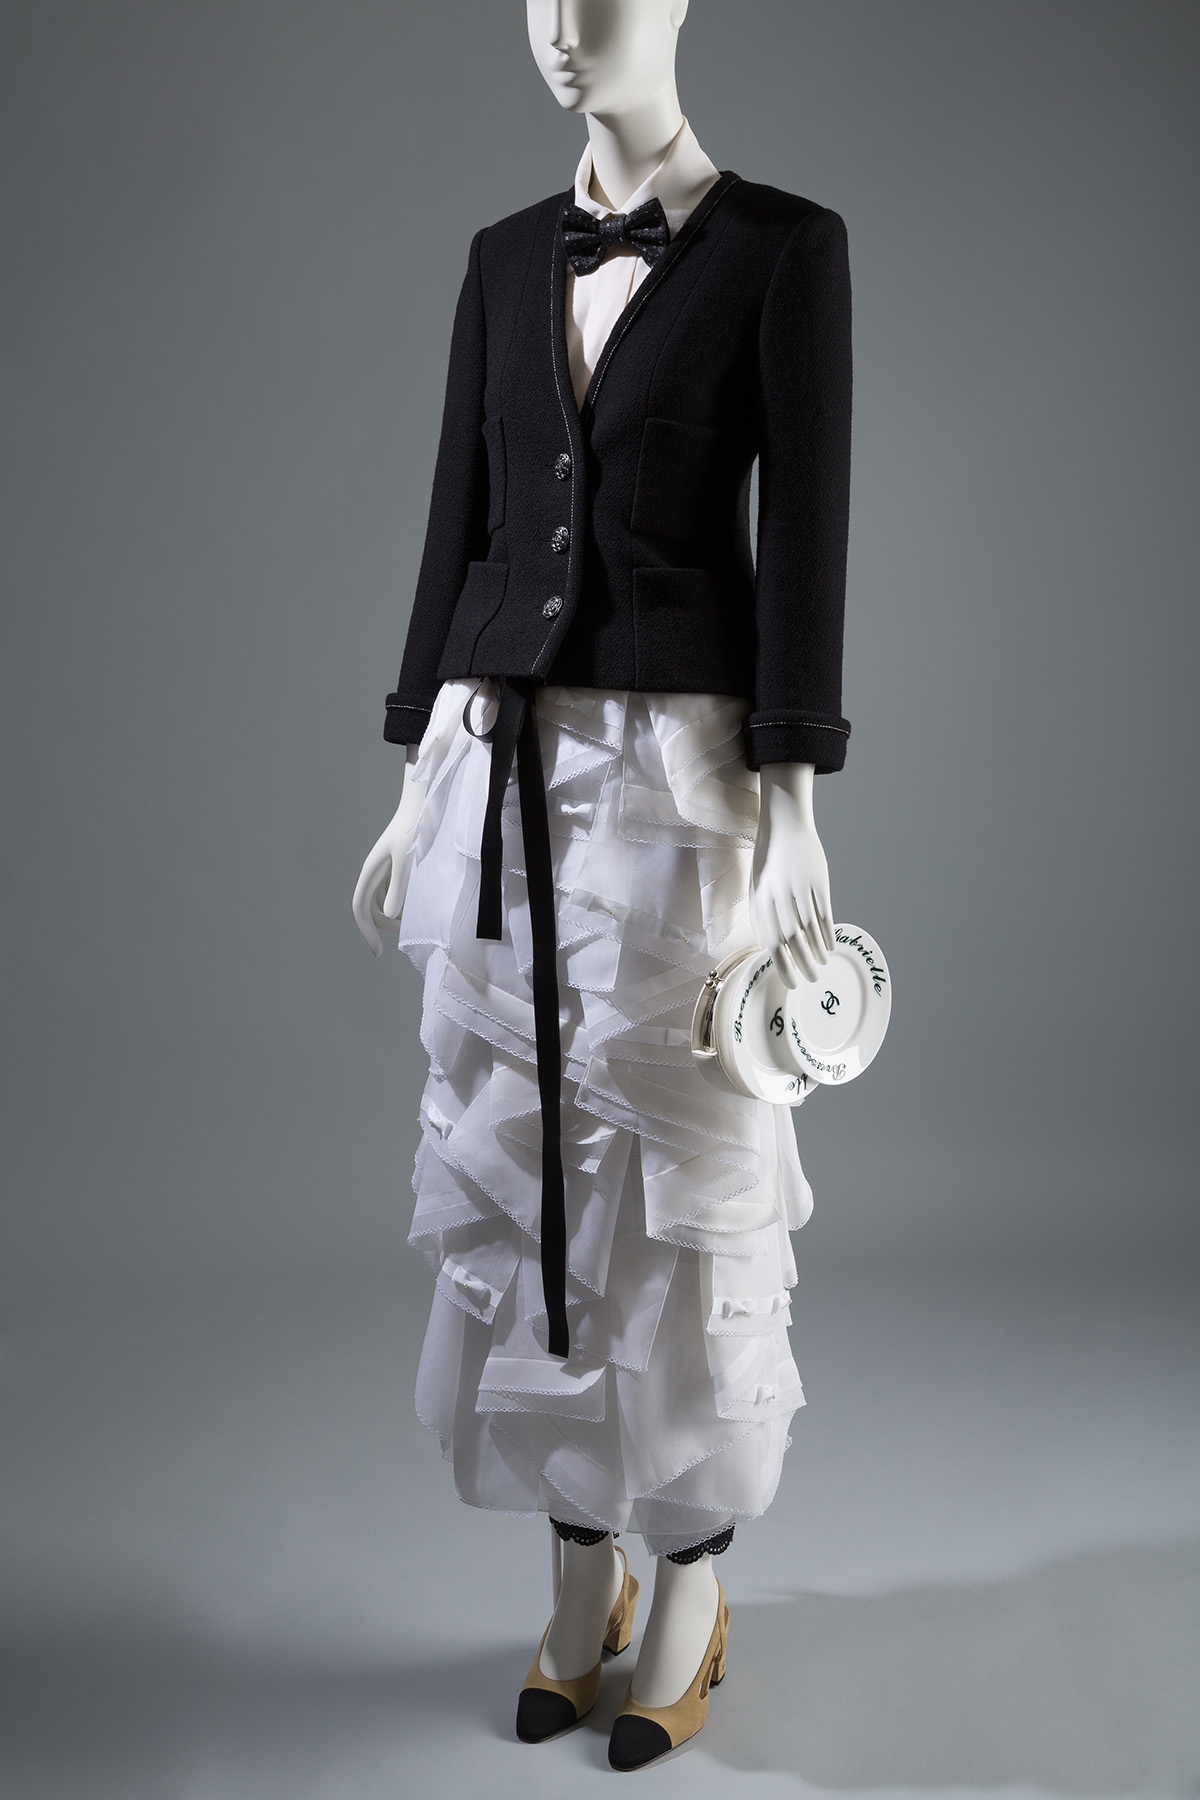 black button down vneck top with white ruffled skirt and small plate bag